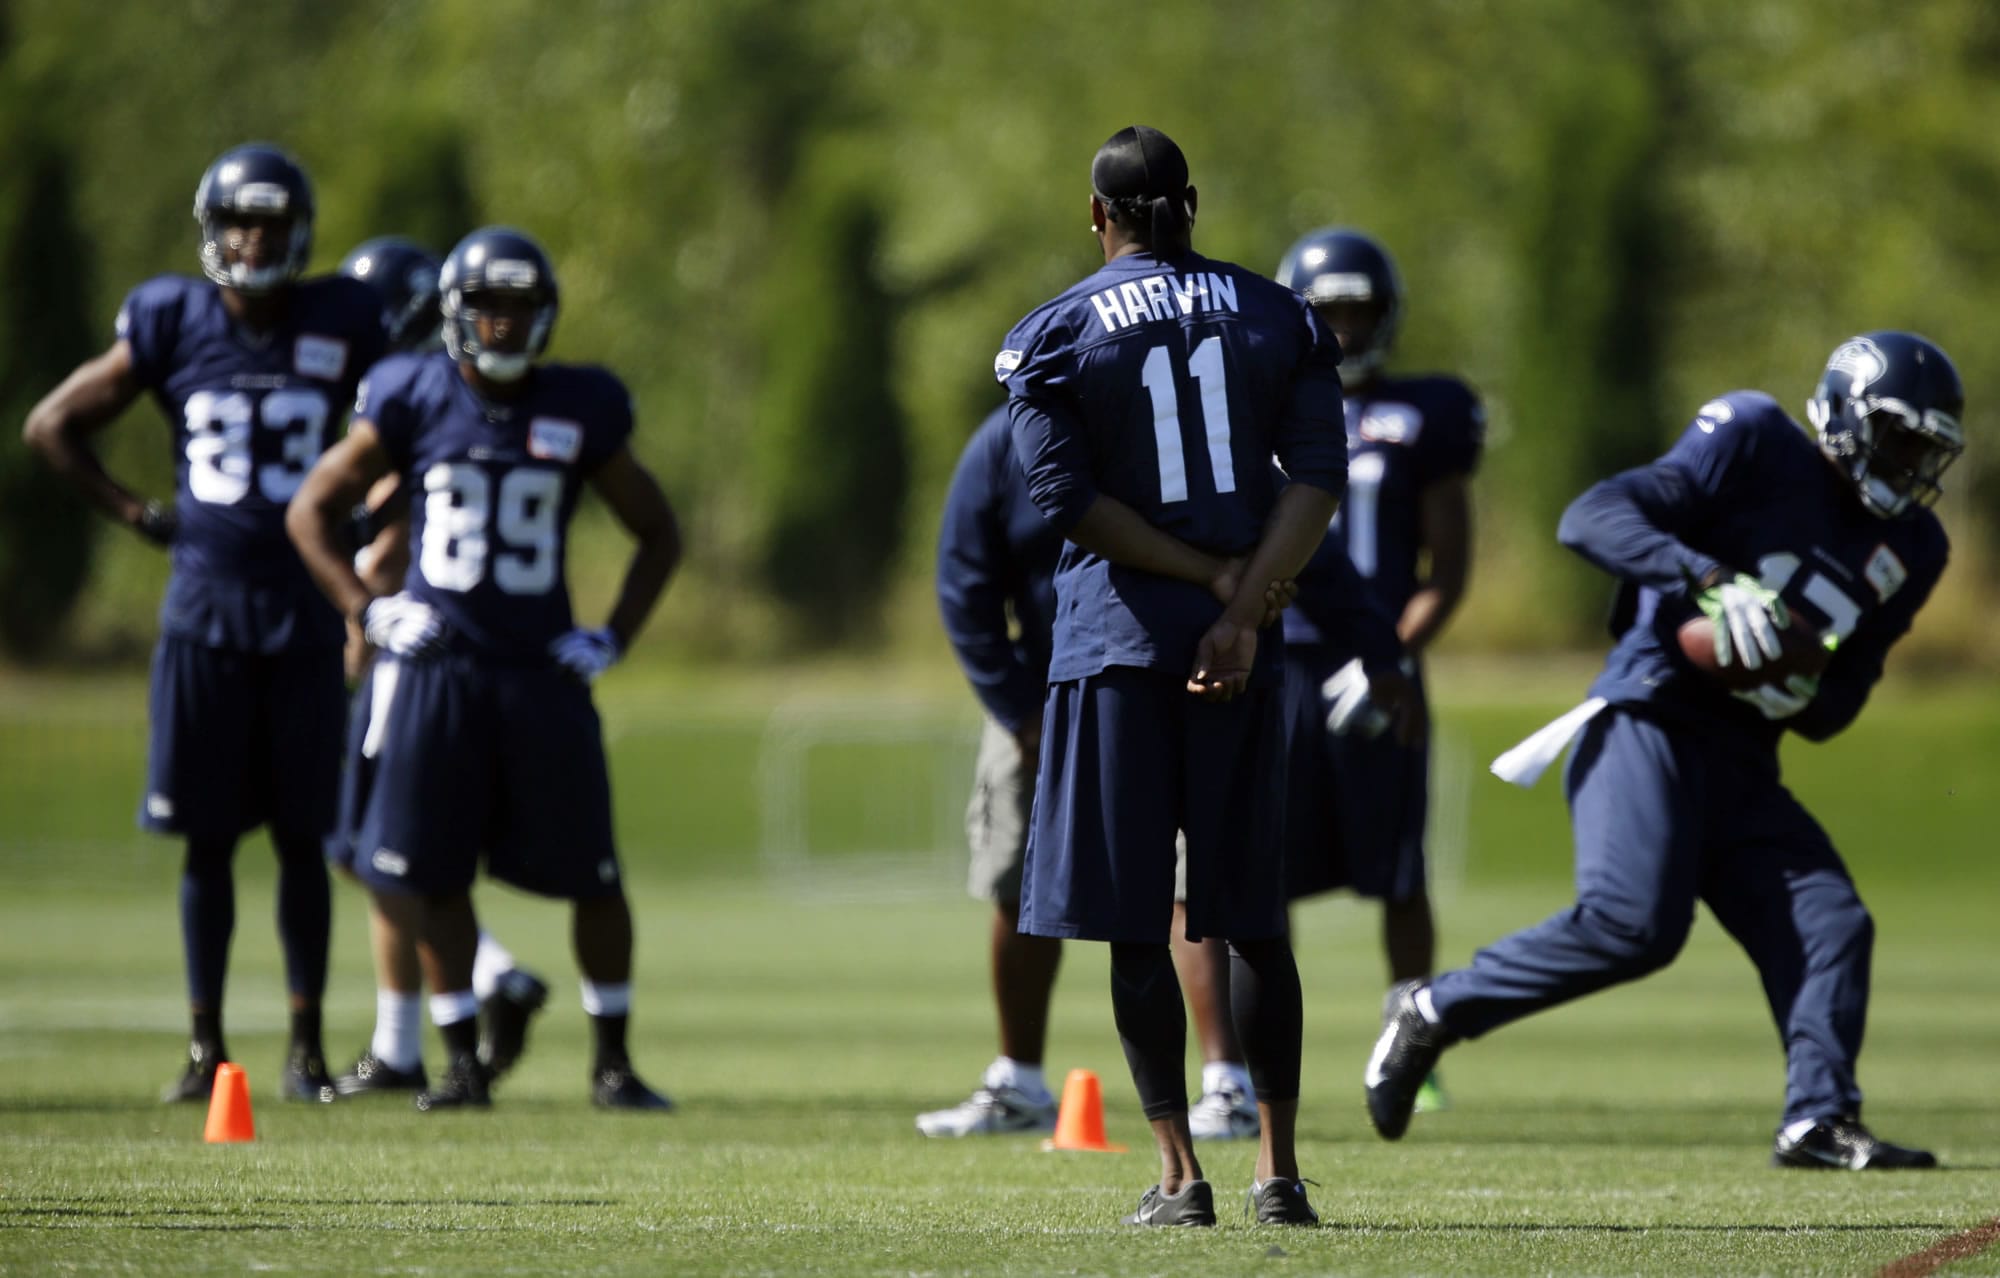 Injured Seattle Seahawks wide receiver Percy Harvin watches as other receivers go through practice drills during training camp on Saturday in Renton.